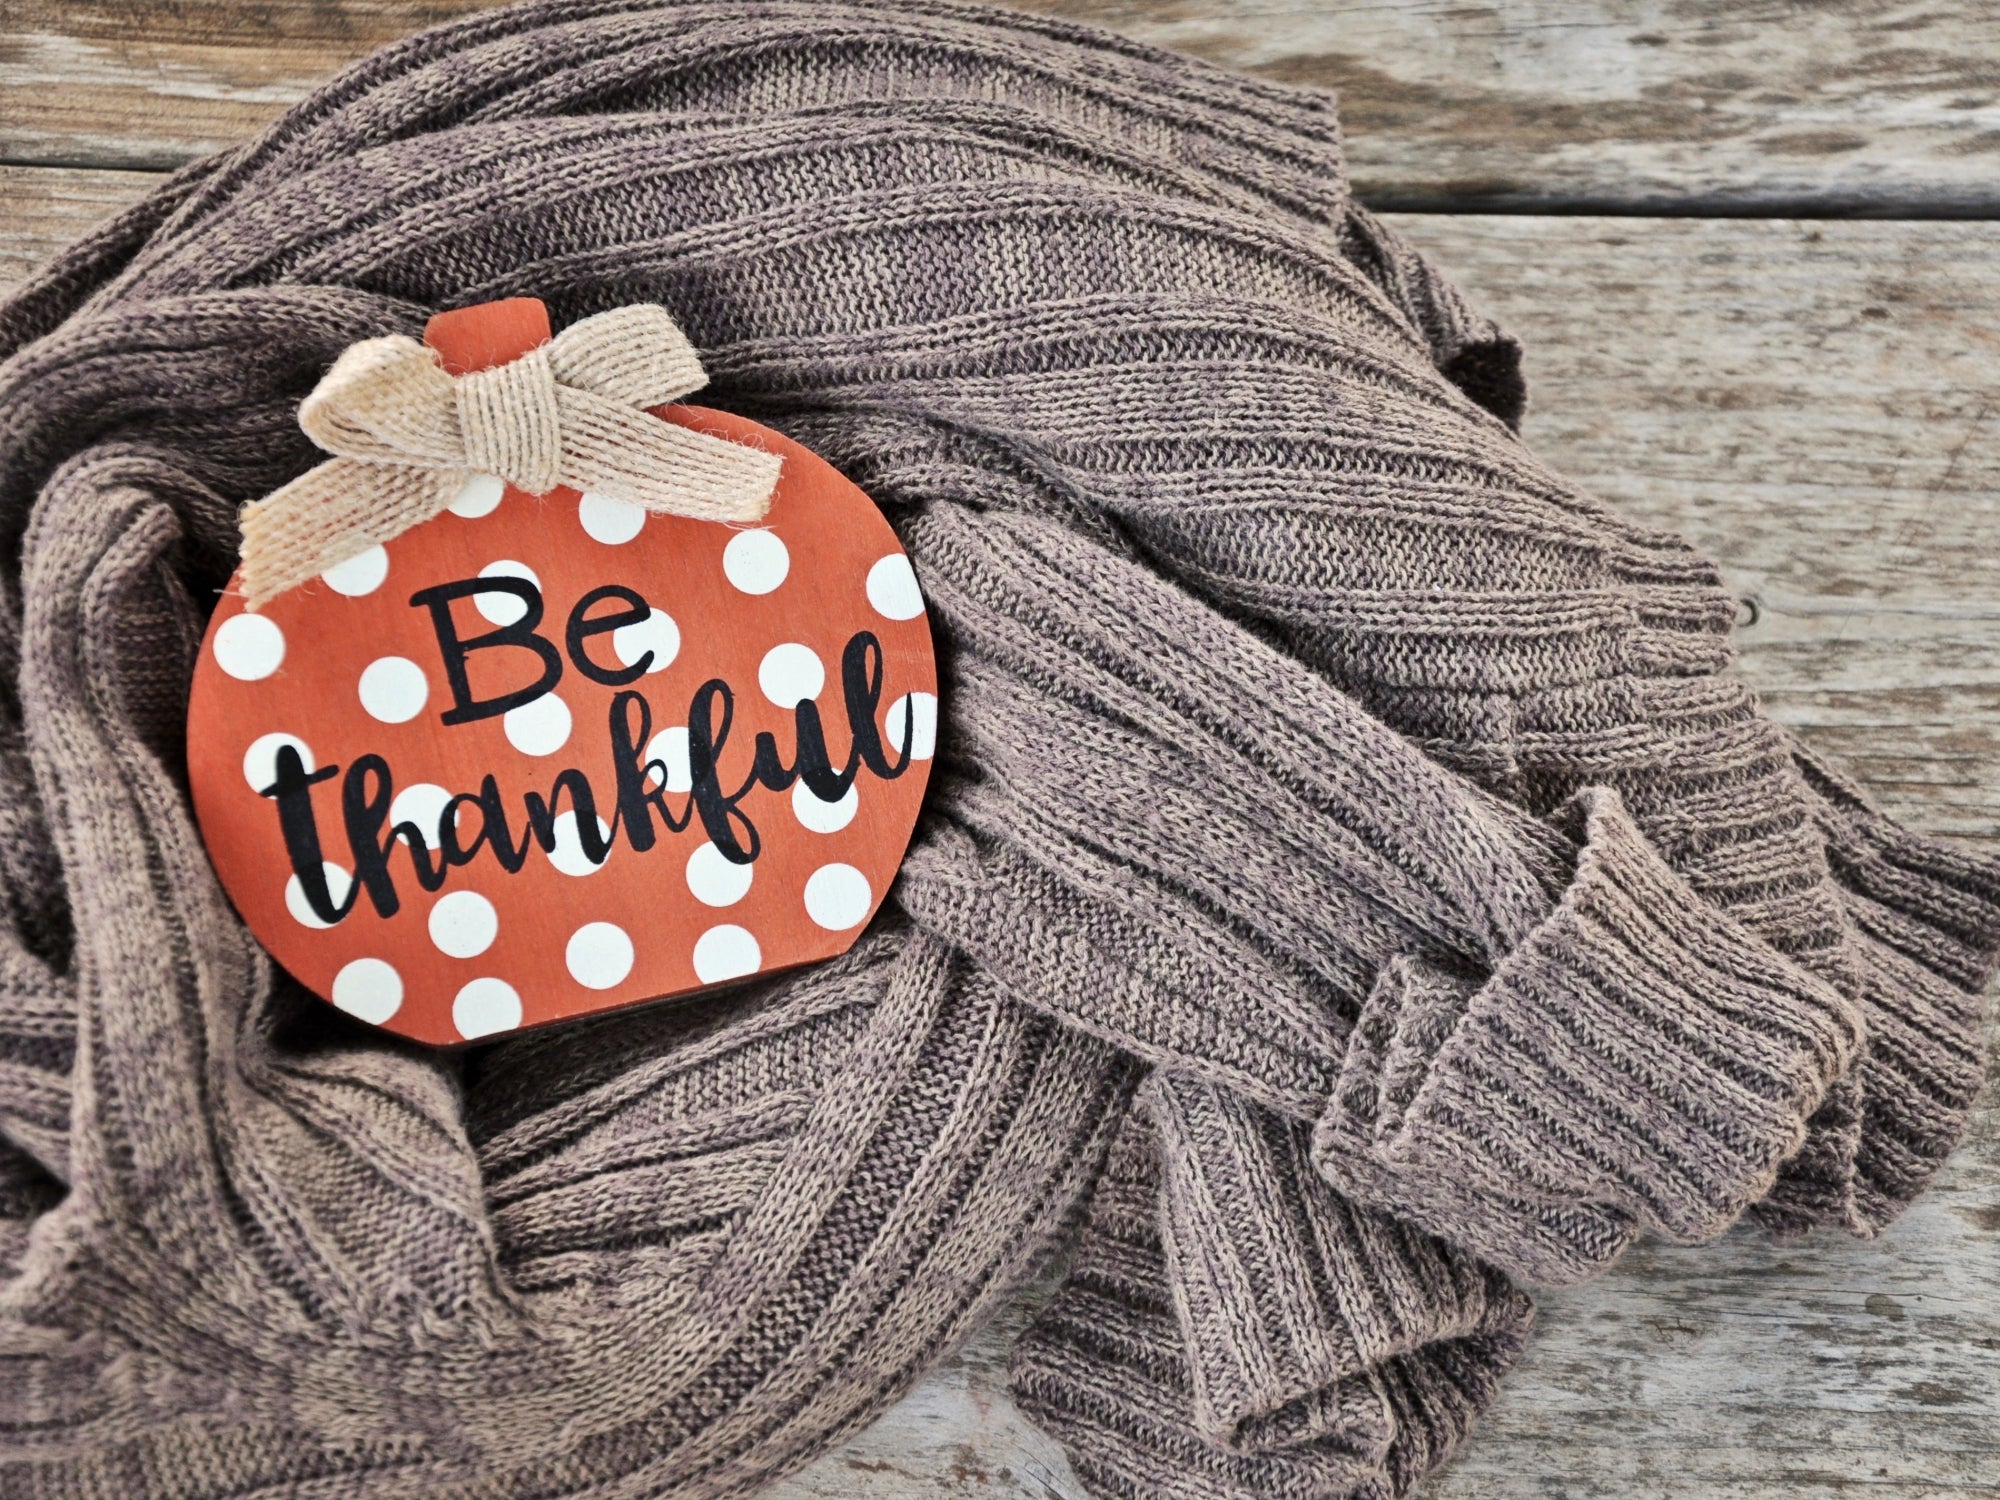 What Are Practical Ways to Express Our Gratitude?